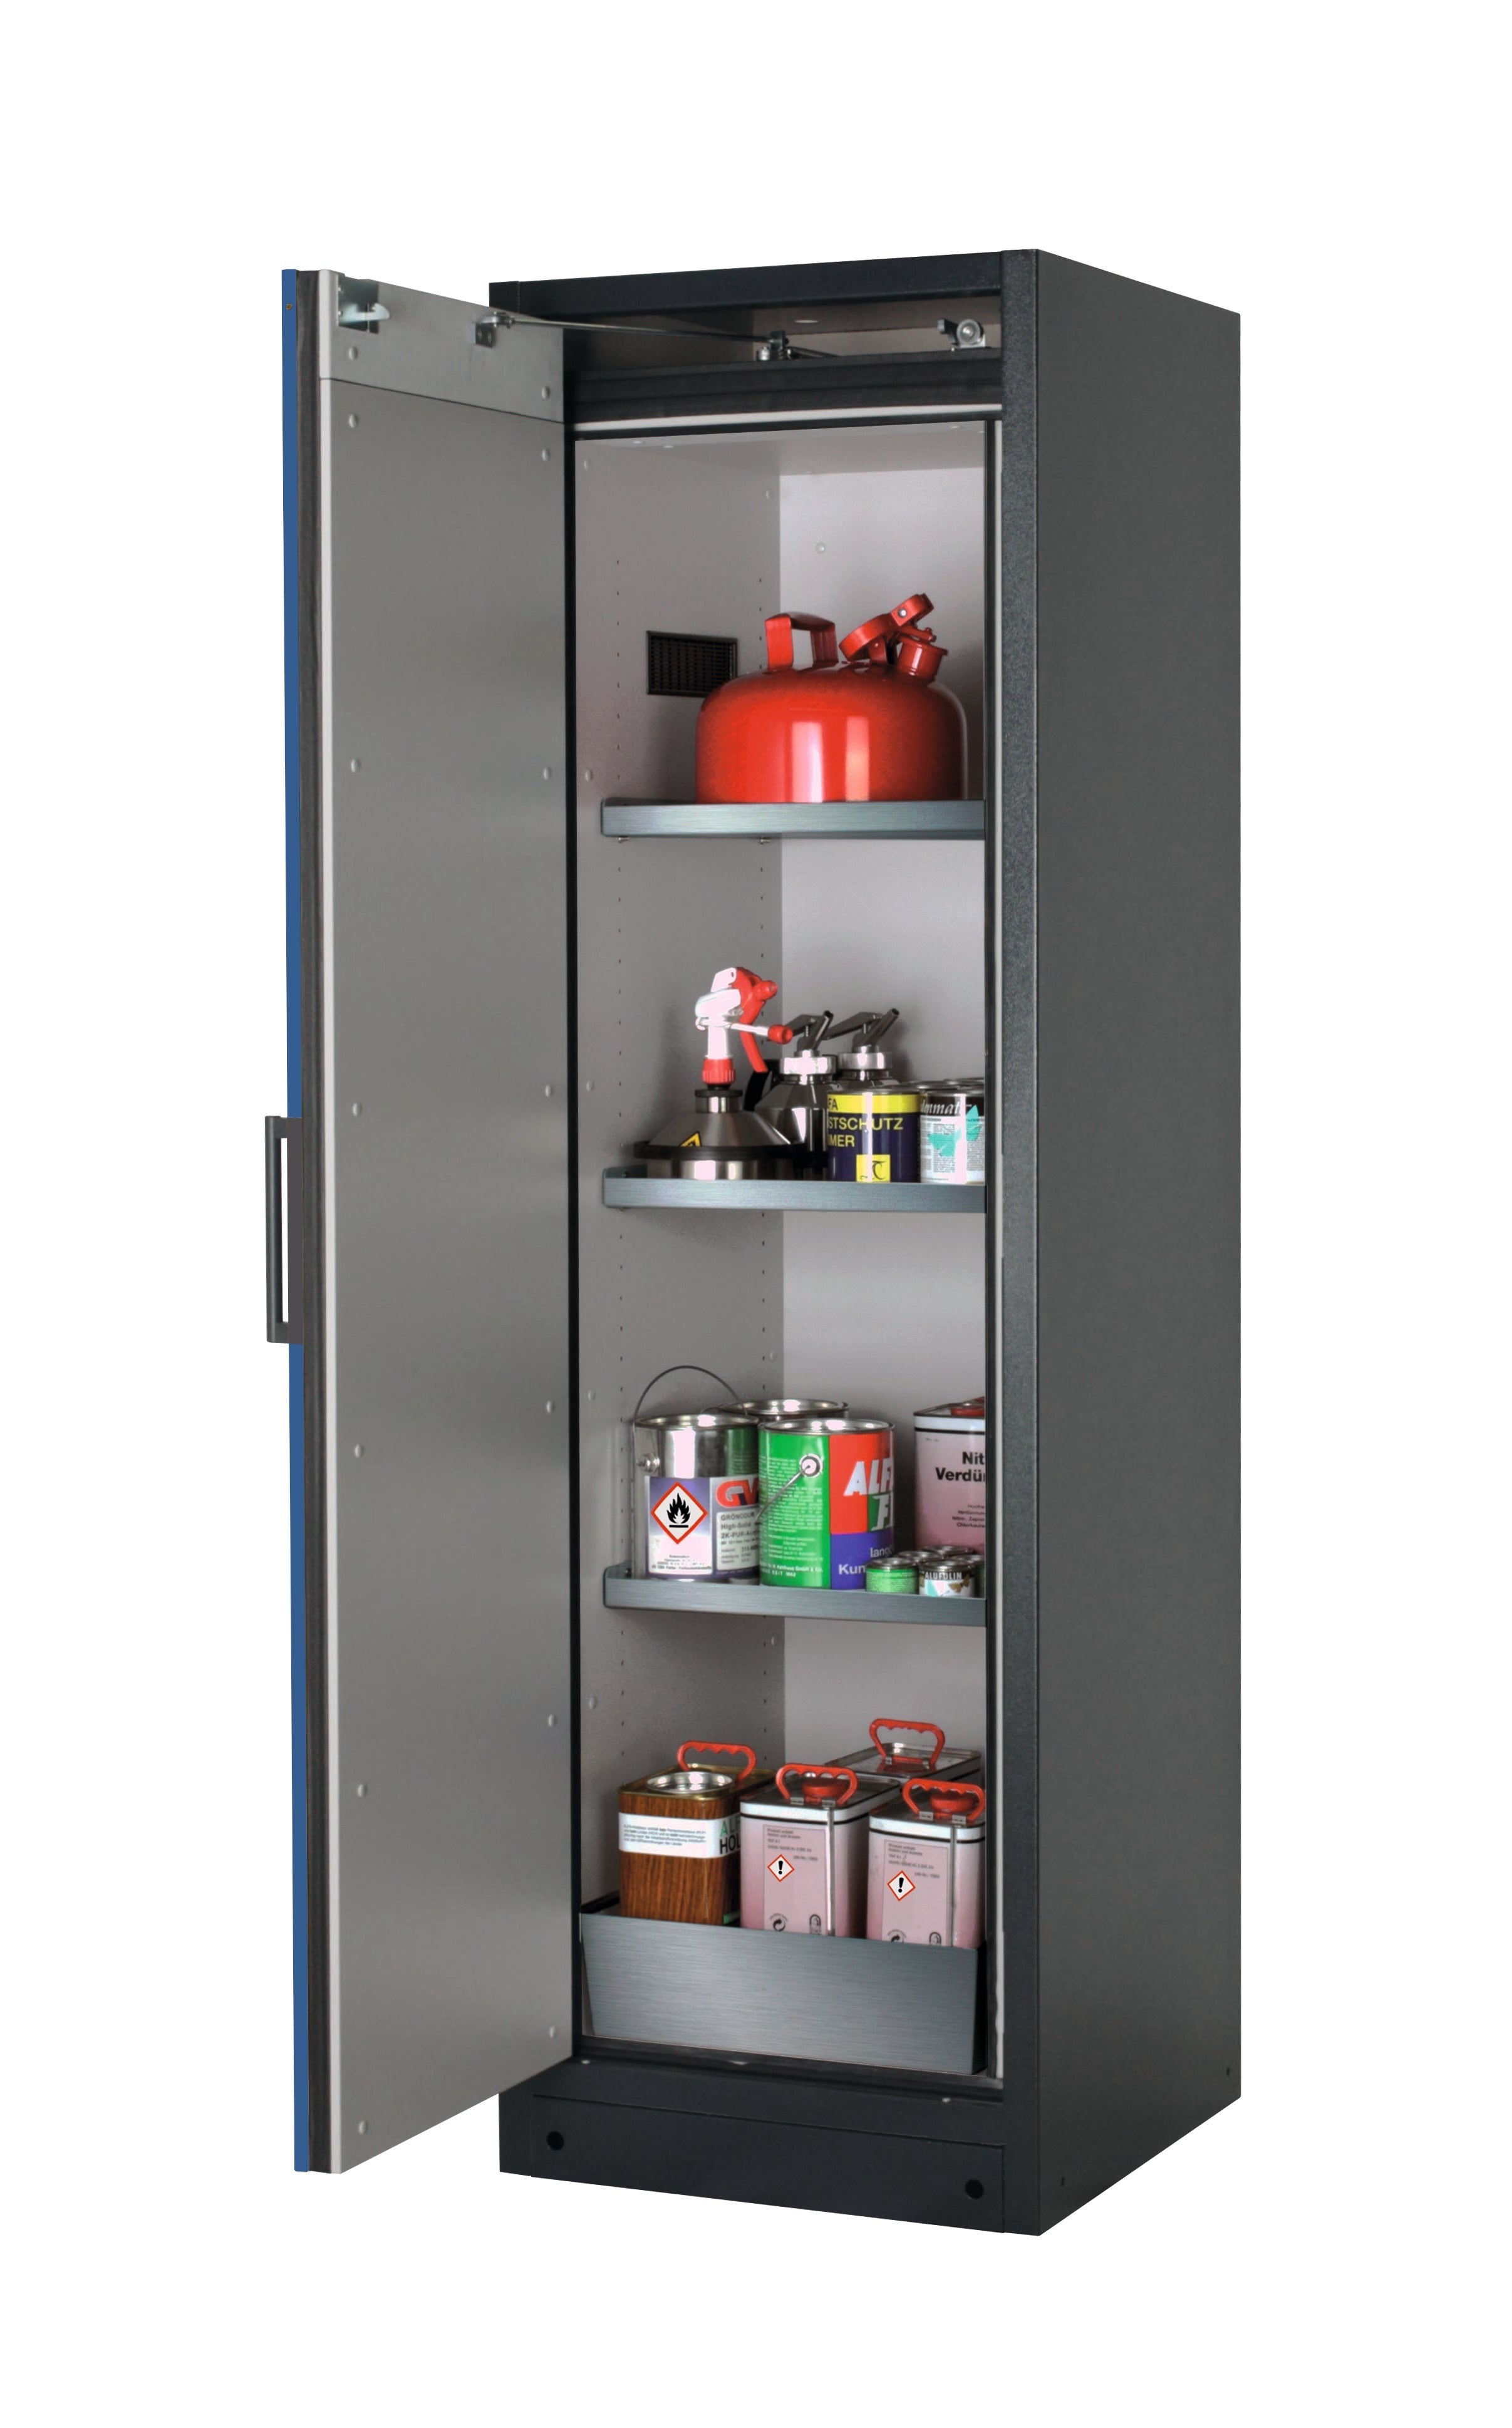 Type 90 safety storage cabinet Q-CLASSIC-90 model Q90.195.060 in gentian blue RAL 5010 with 3x shelf standard (stainless steel 1.4301),